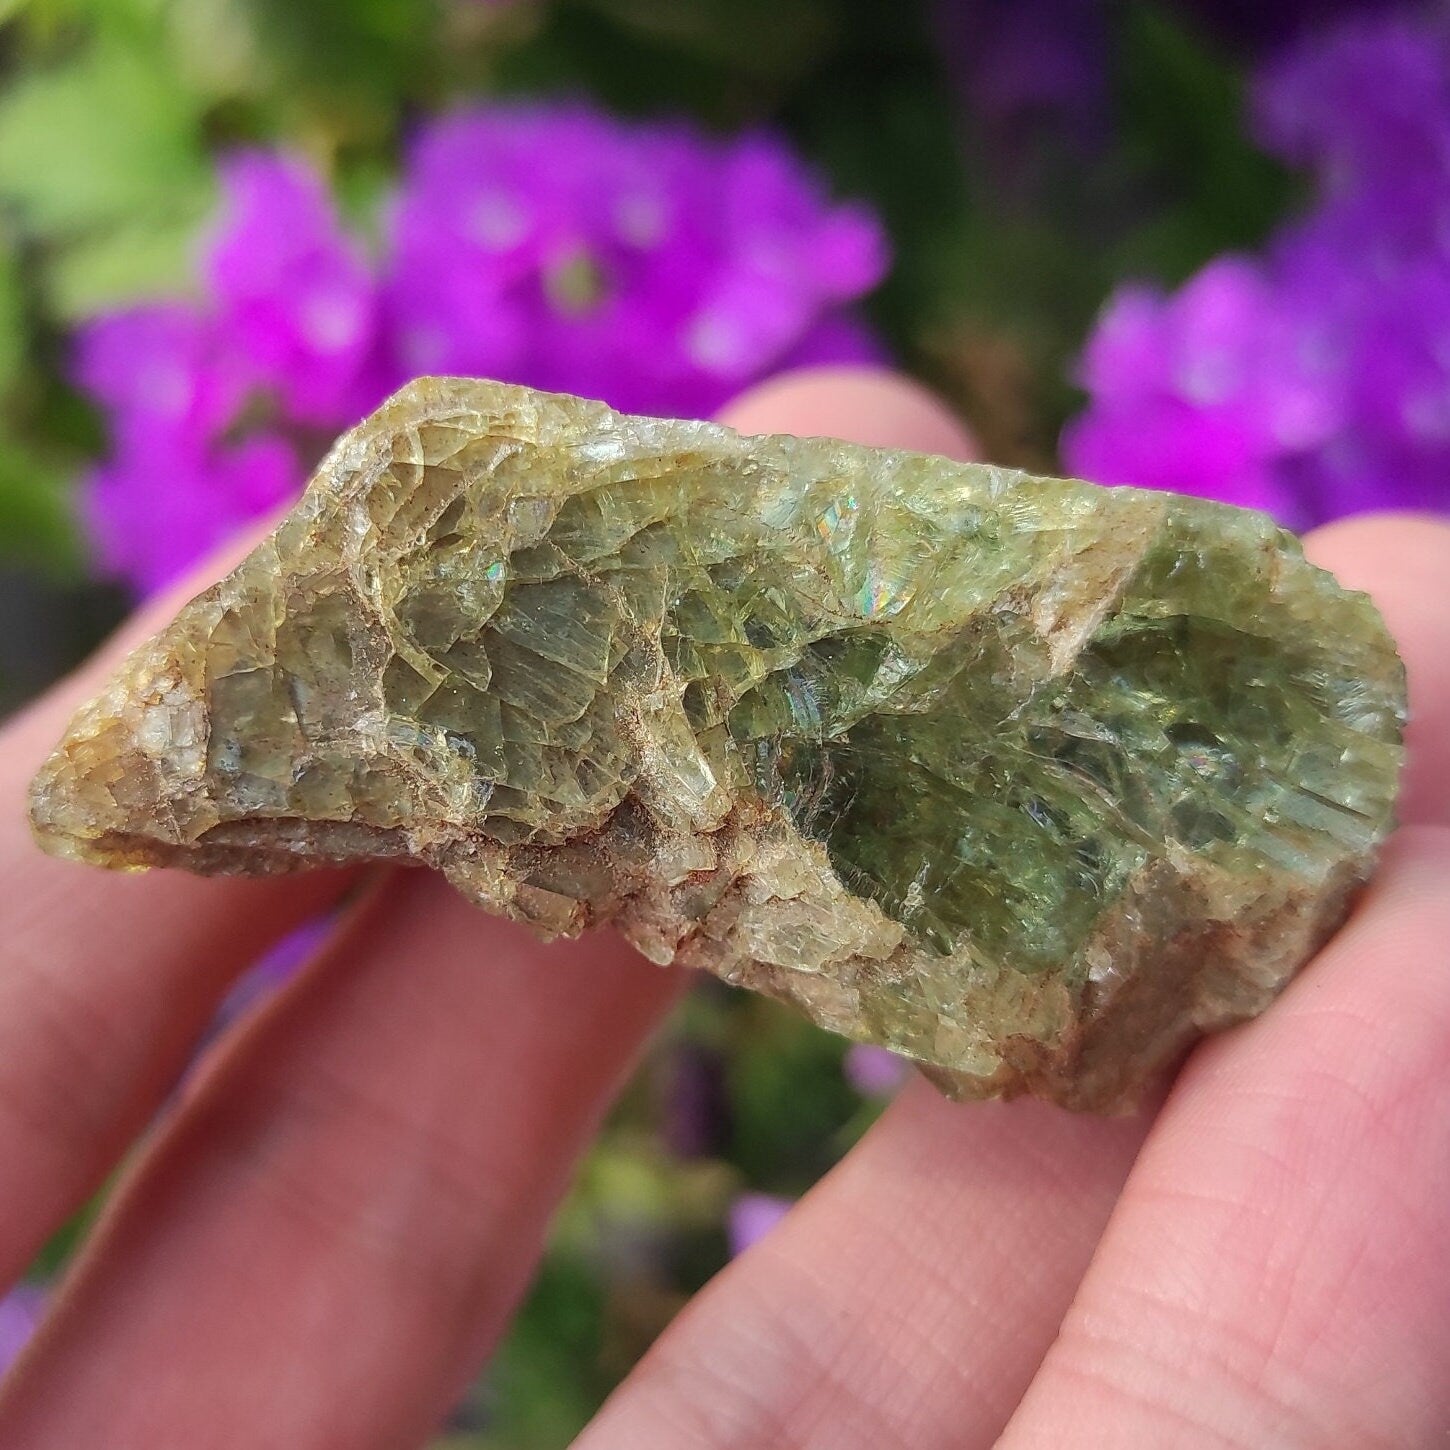 51g Green Apatite from Tory Hill, Ontario, Canada - Green Fluoroapatite Crystal - Raw Apatite Mineral Specimen - Titanite Hill Occurence